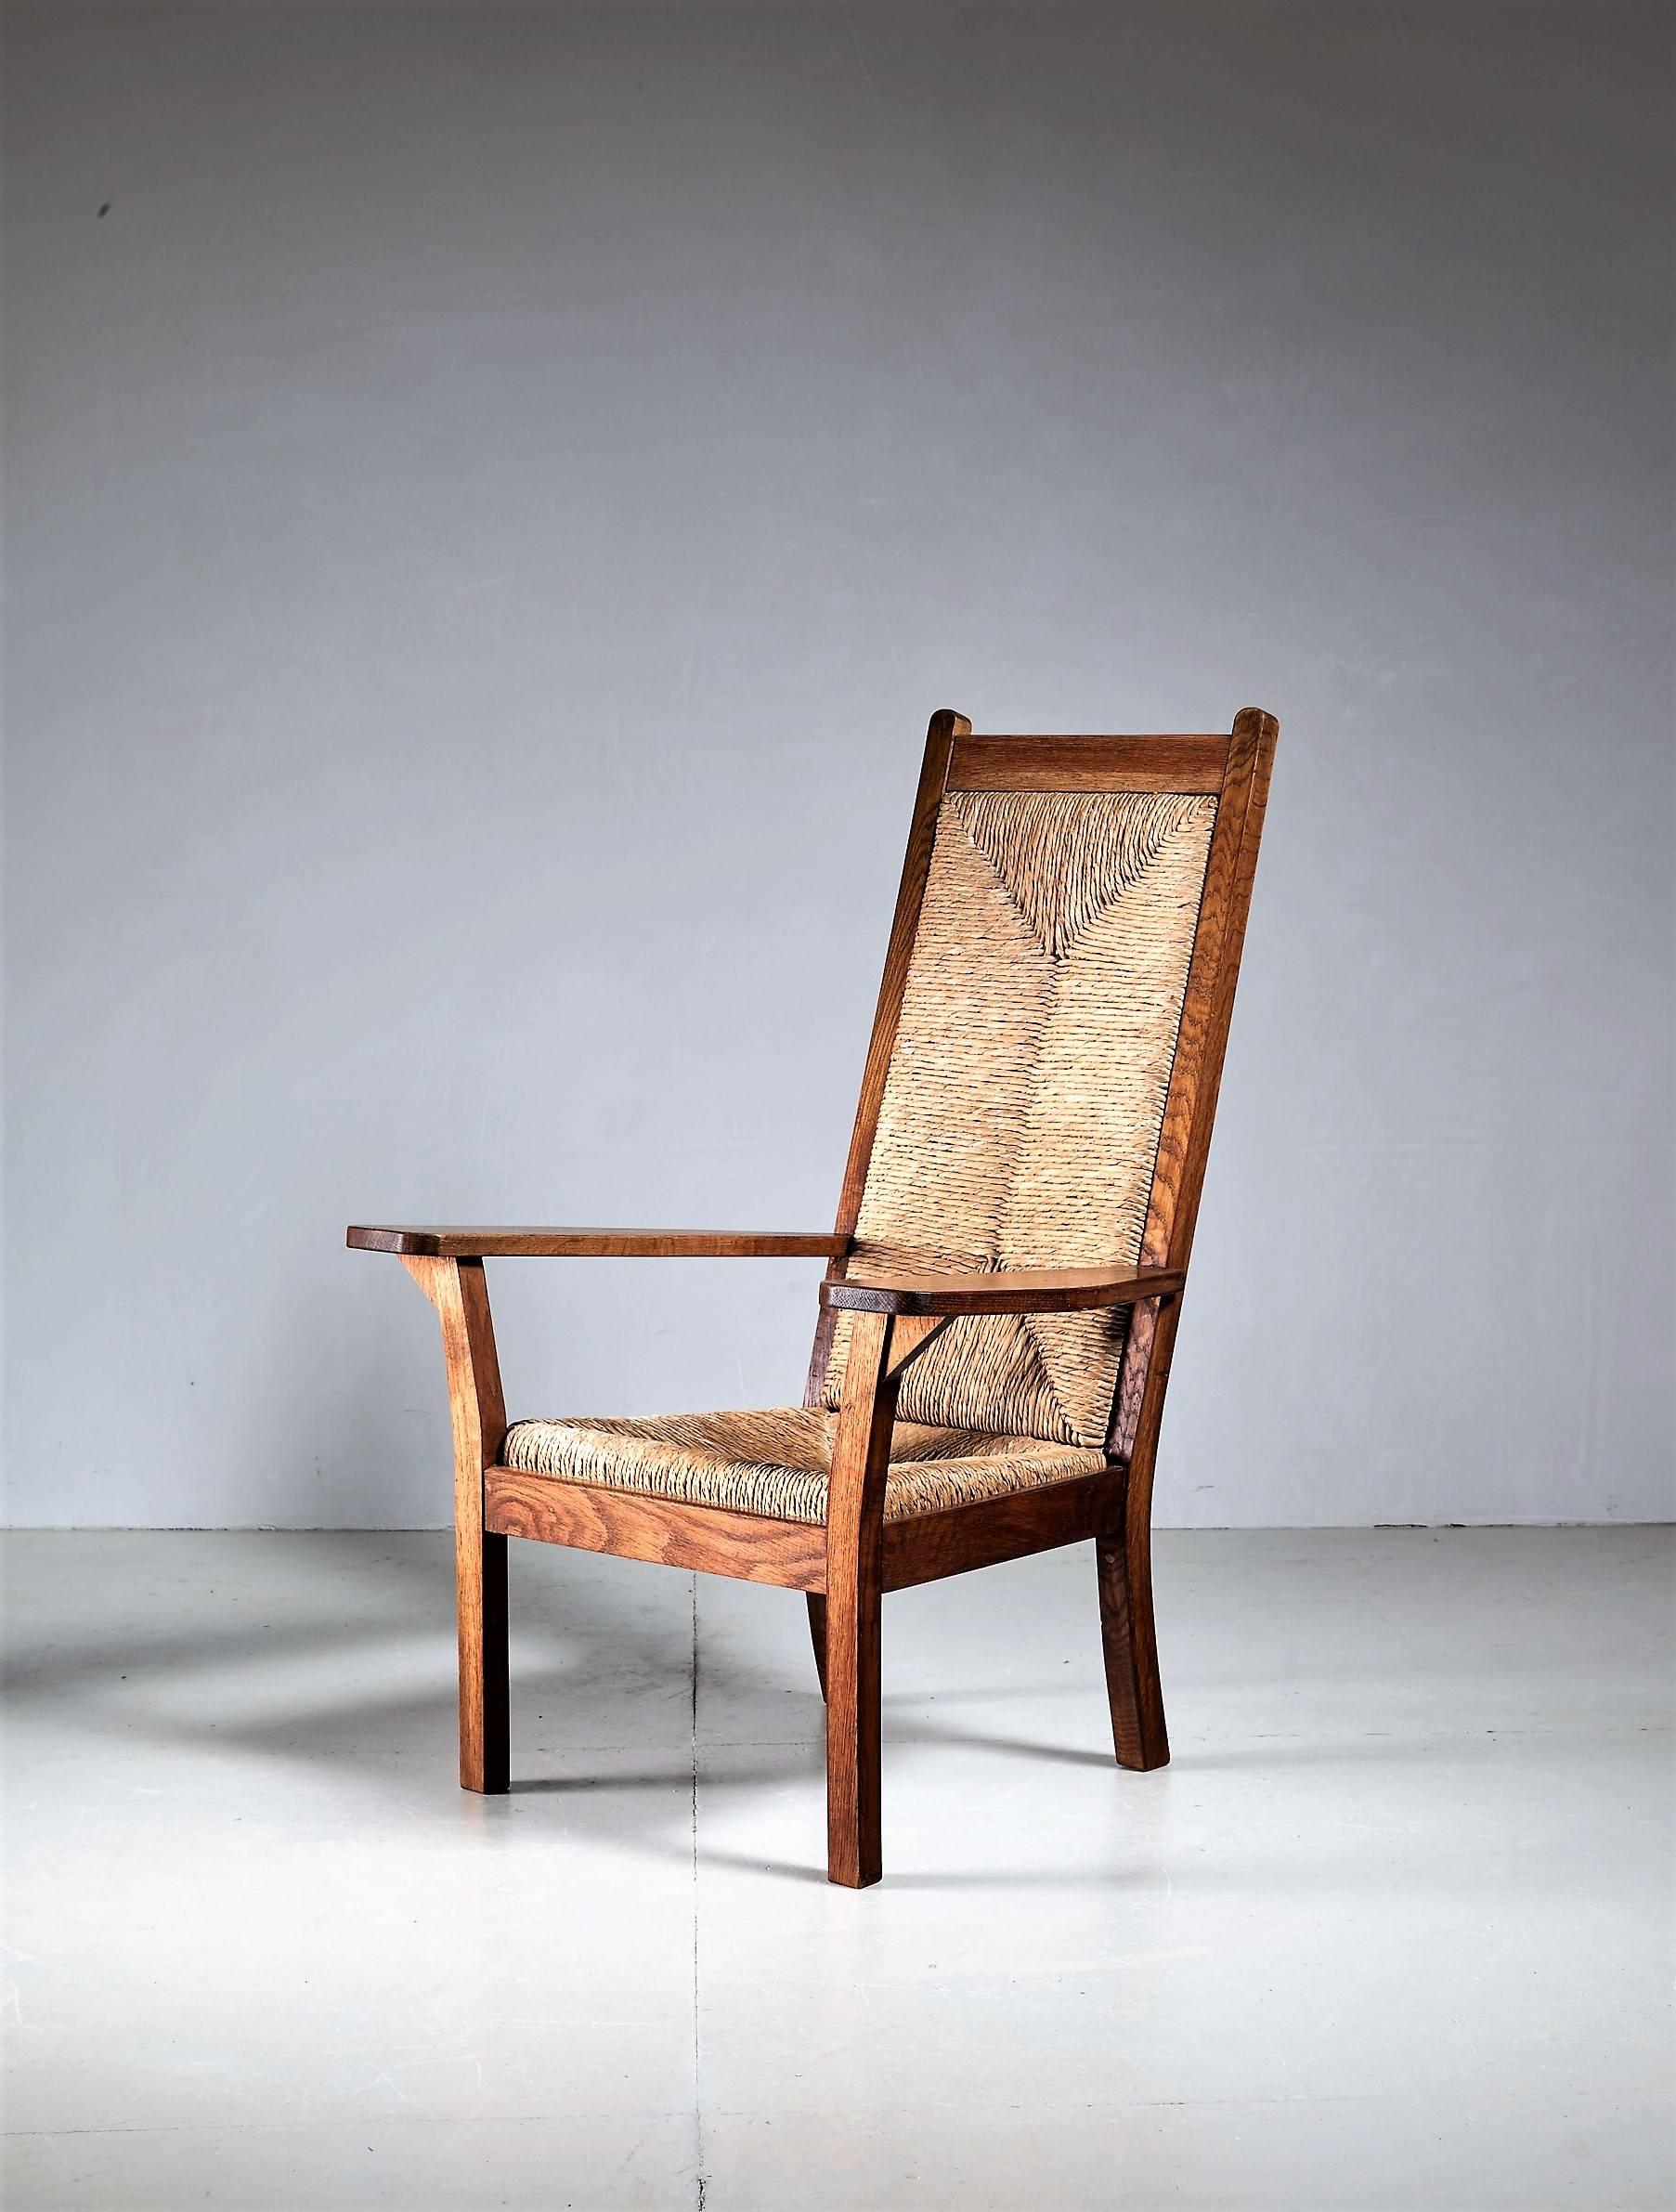 A Worpsweder high back armchair, designed by Willi Ohler in the 1920s. The chair is made of an oak frame with wide armrests and with a woven rush seating and backrest. The original rush is in a great condition. Womderful Campagne style